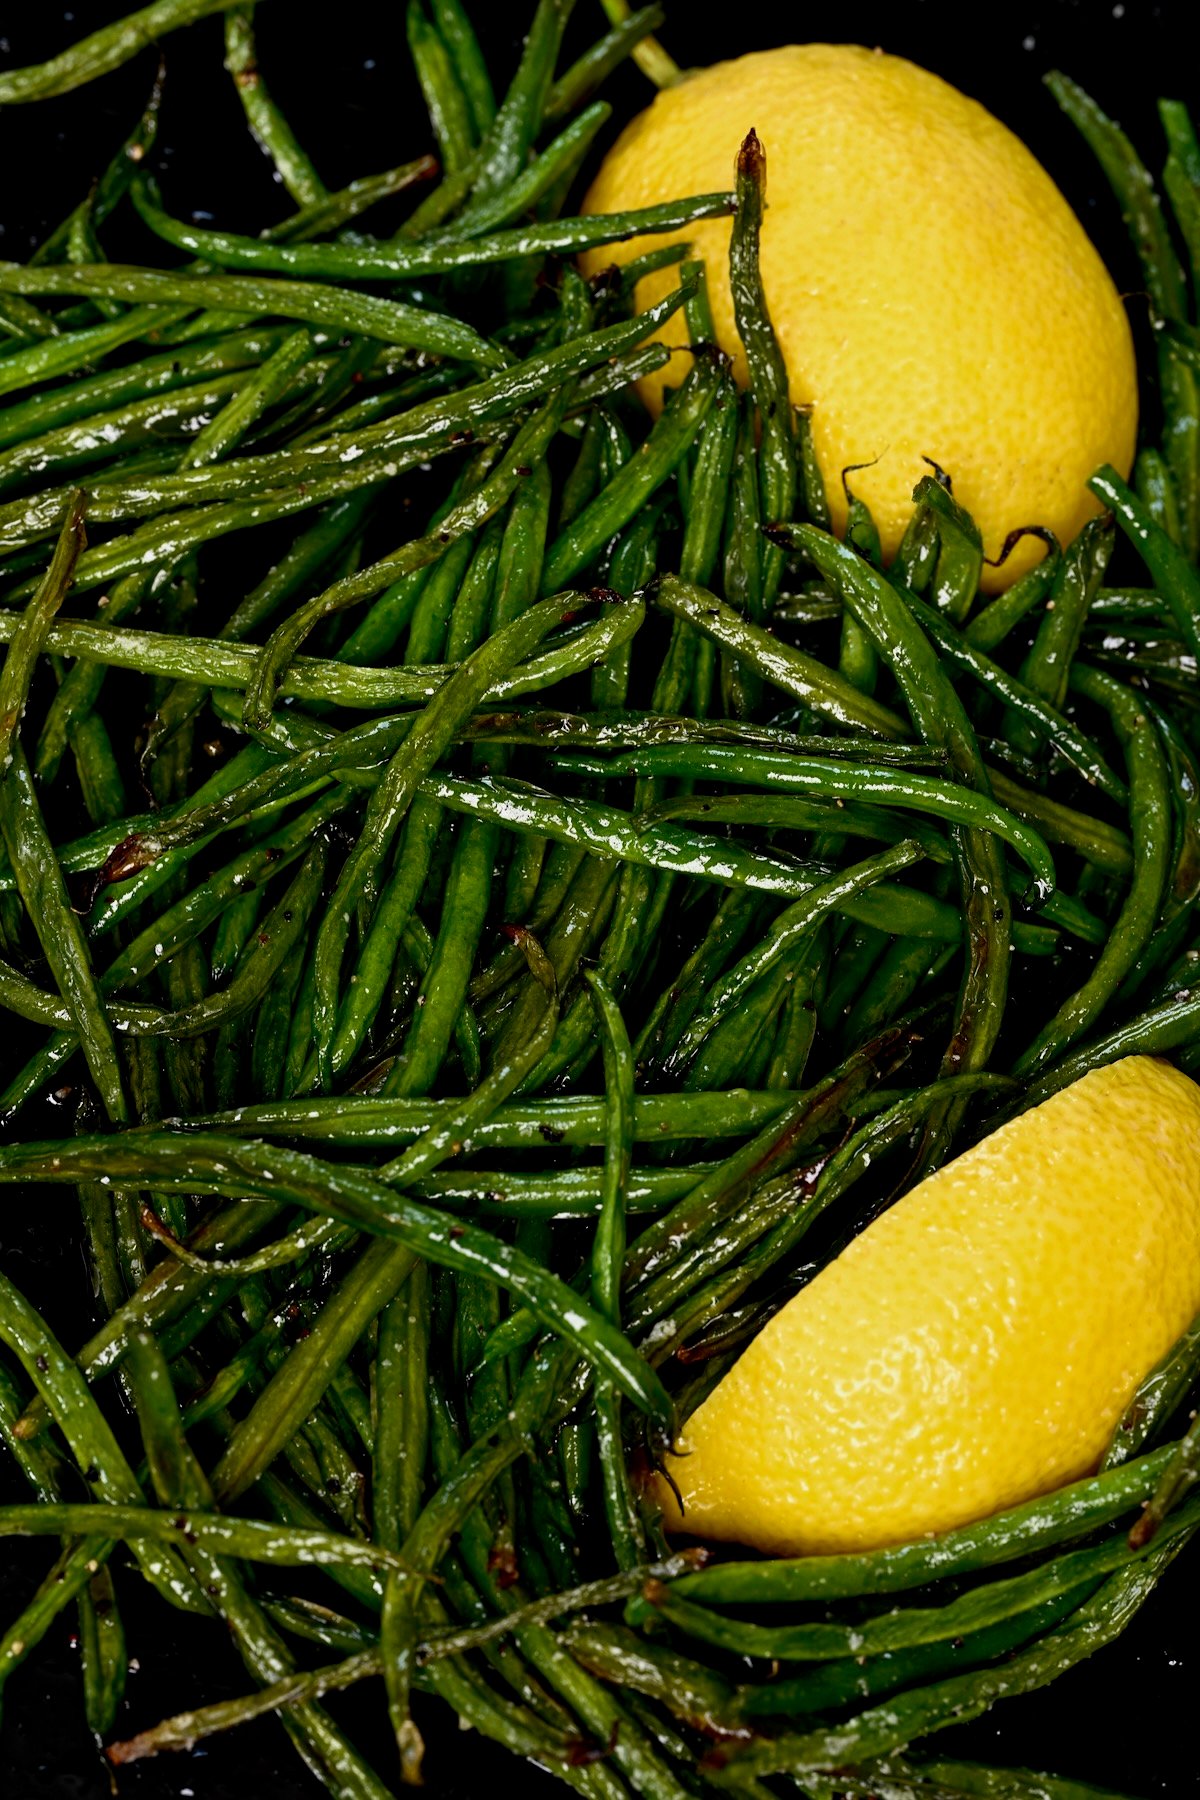 Lemon wedges and roasted green beans